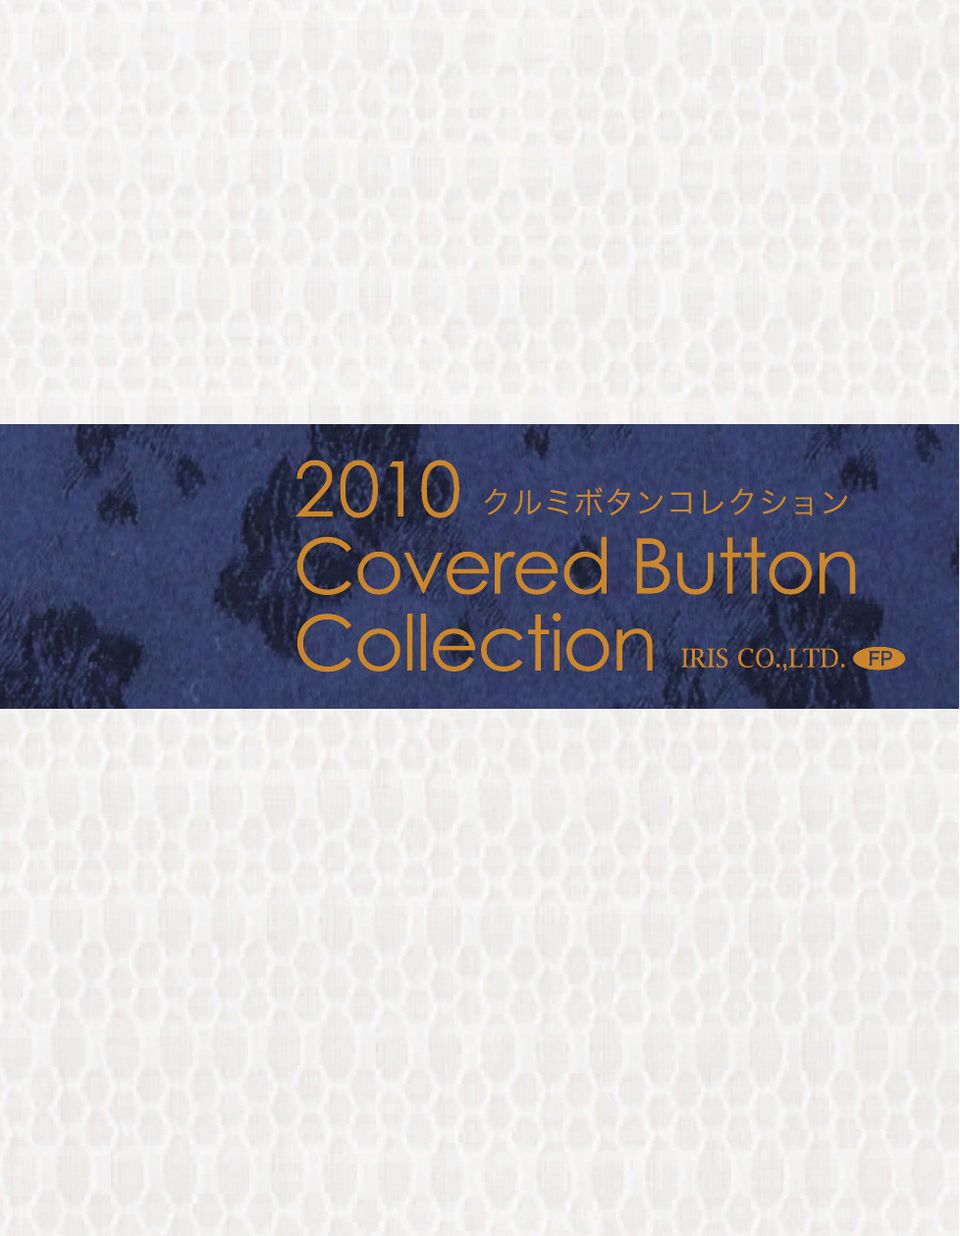 IRIS-SAMPLE-FP 2010Covered Button Collection[サンプル帳] アイリス